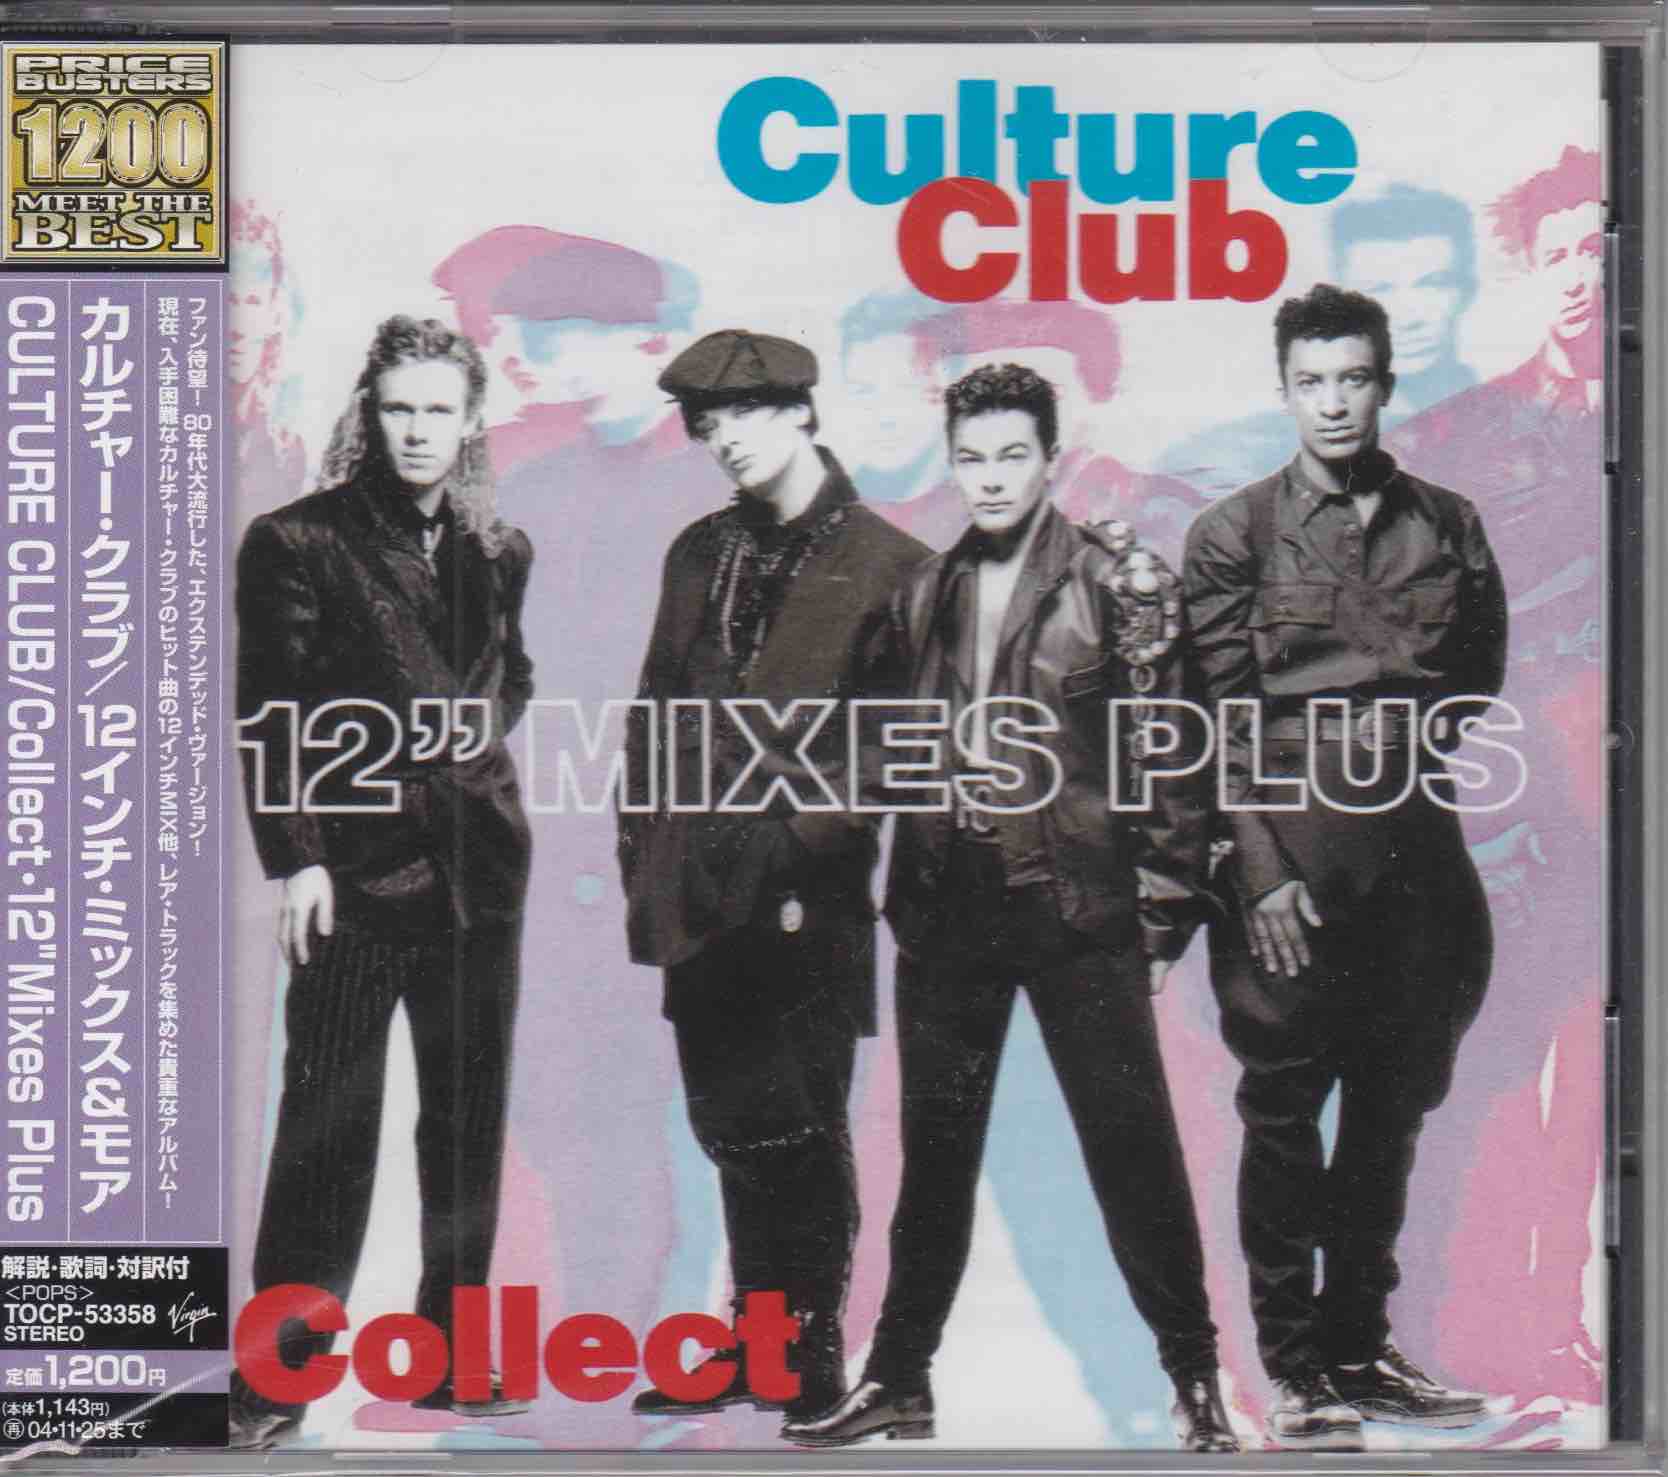 Culture Club ‎– Collect - 12" Mixes Plus     (USED)